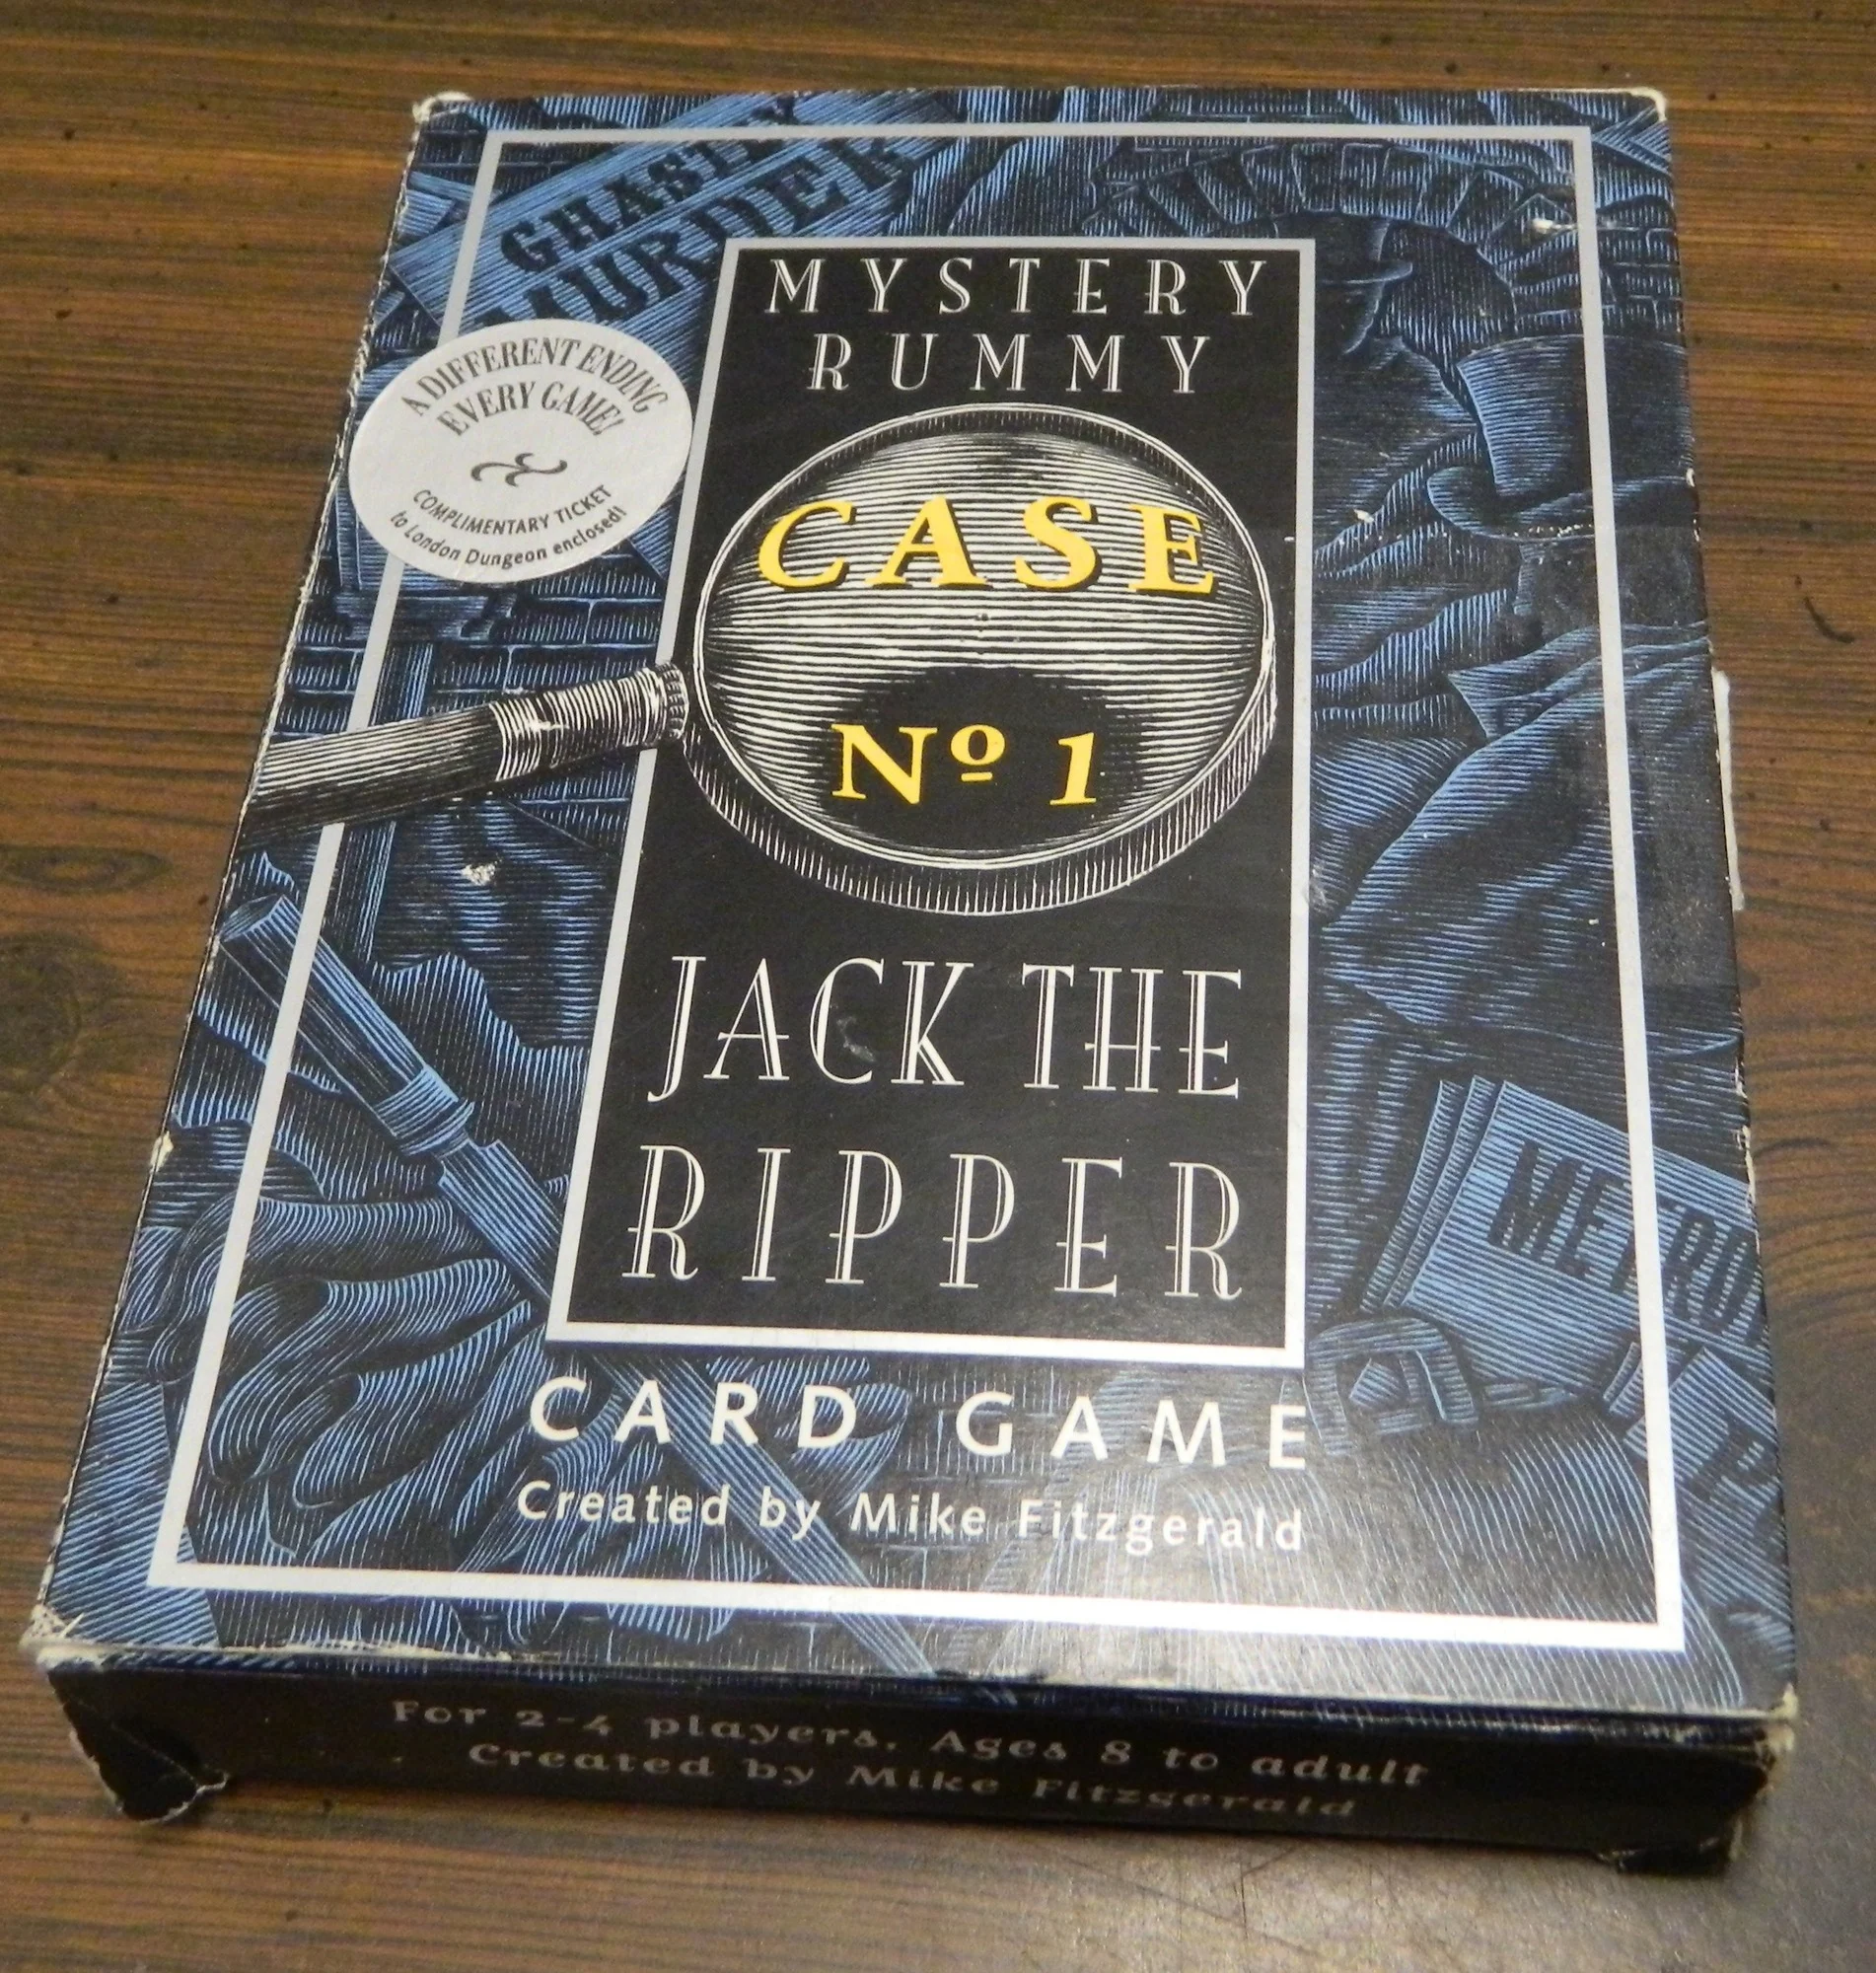 Box for Mystery Rummy Jack the Ripper